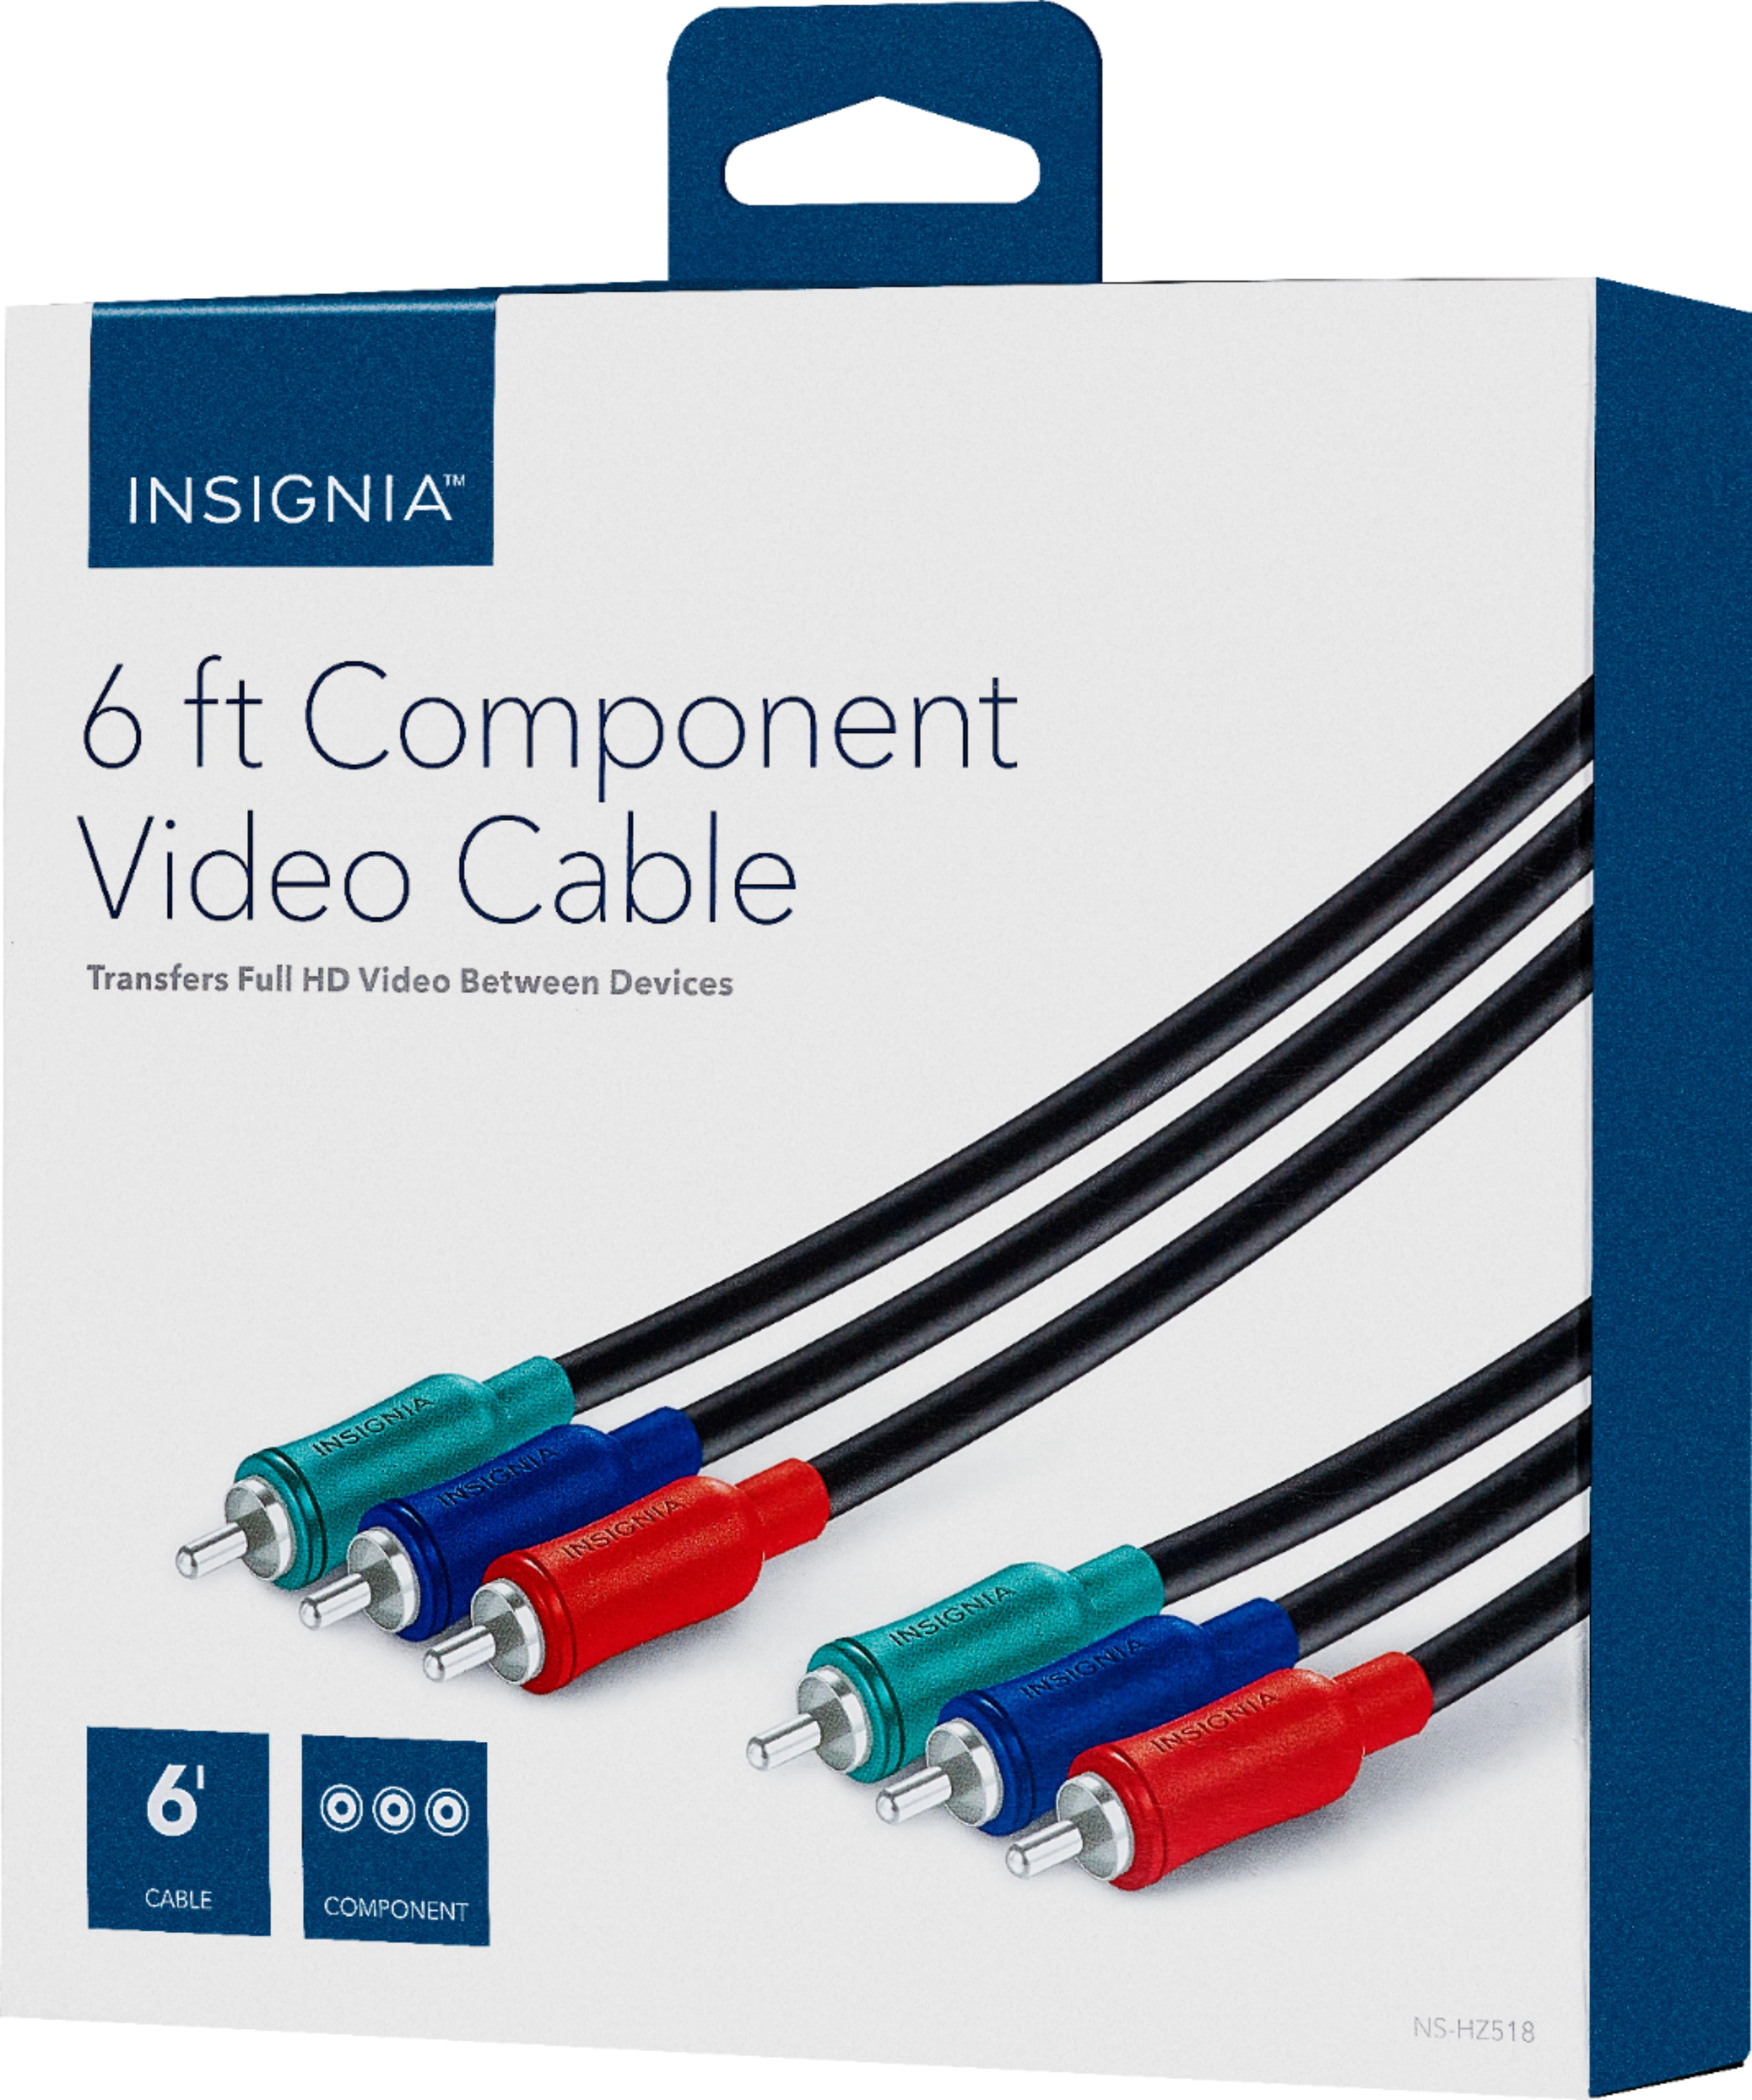 6' Insignia Component Video Cable $5.99 + Free Curbside Pickup at Best Buy